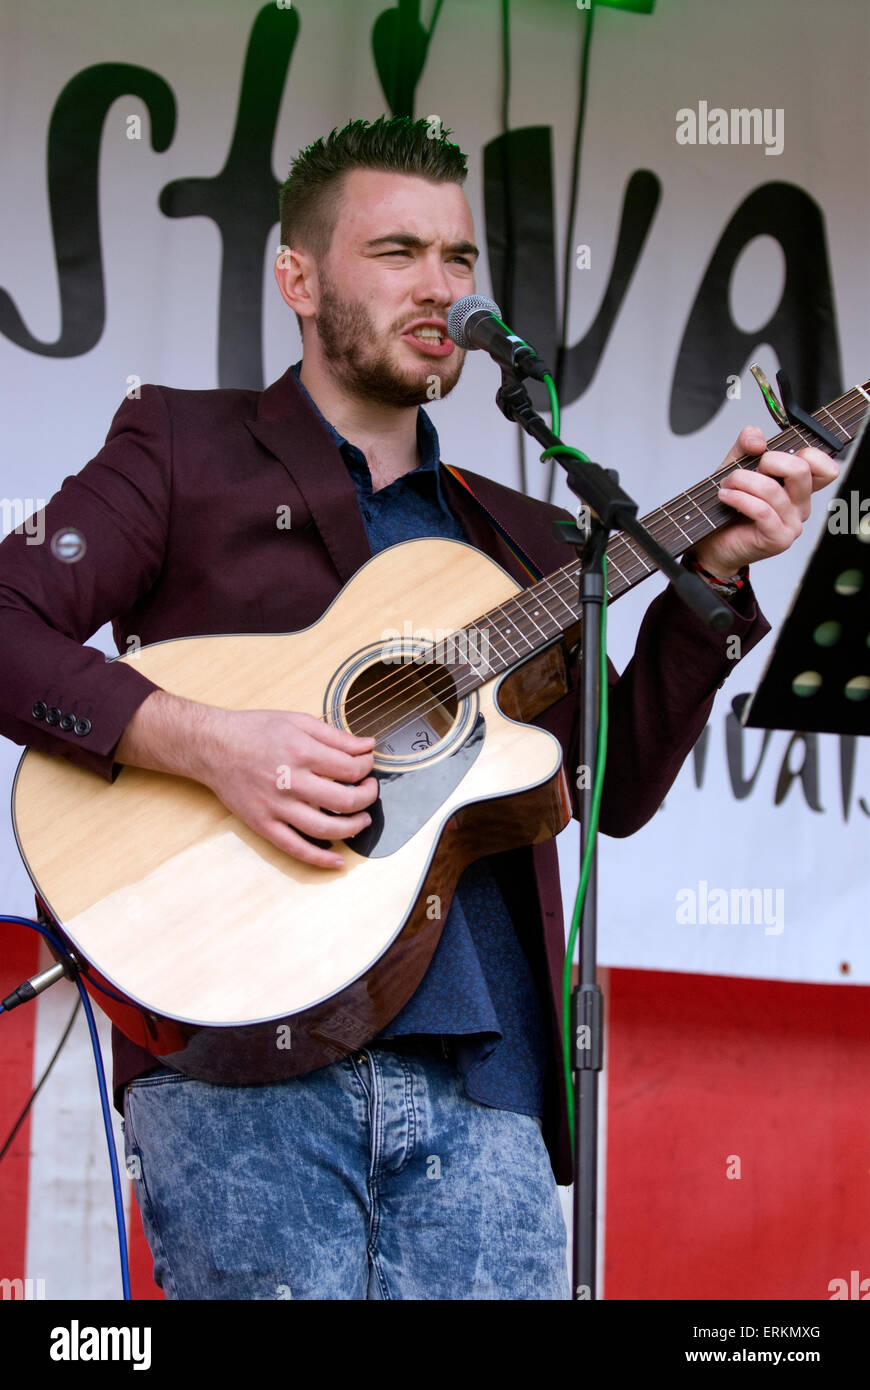 Folk singer Ed Goodale performing on stage at the Milland Food, Drink & Music Festival 2015, Milland, Liphook, Hampshire, UK. Stock Photo